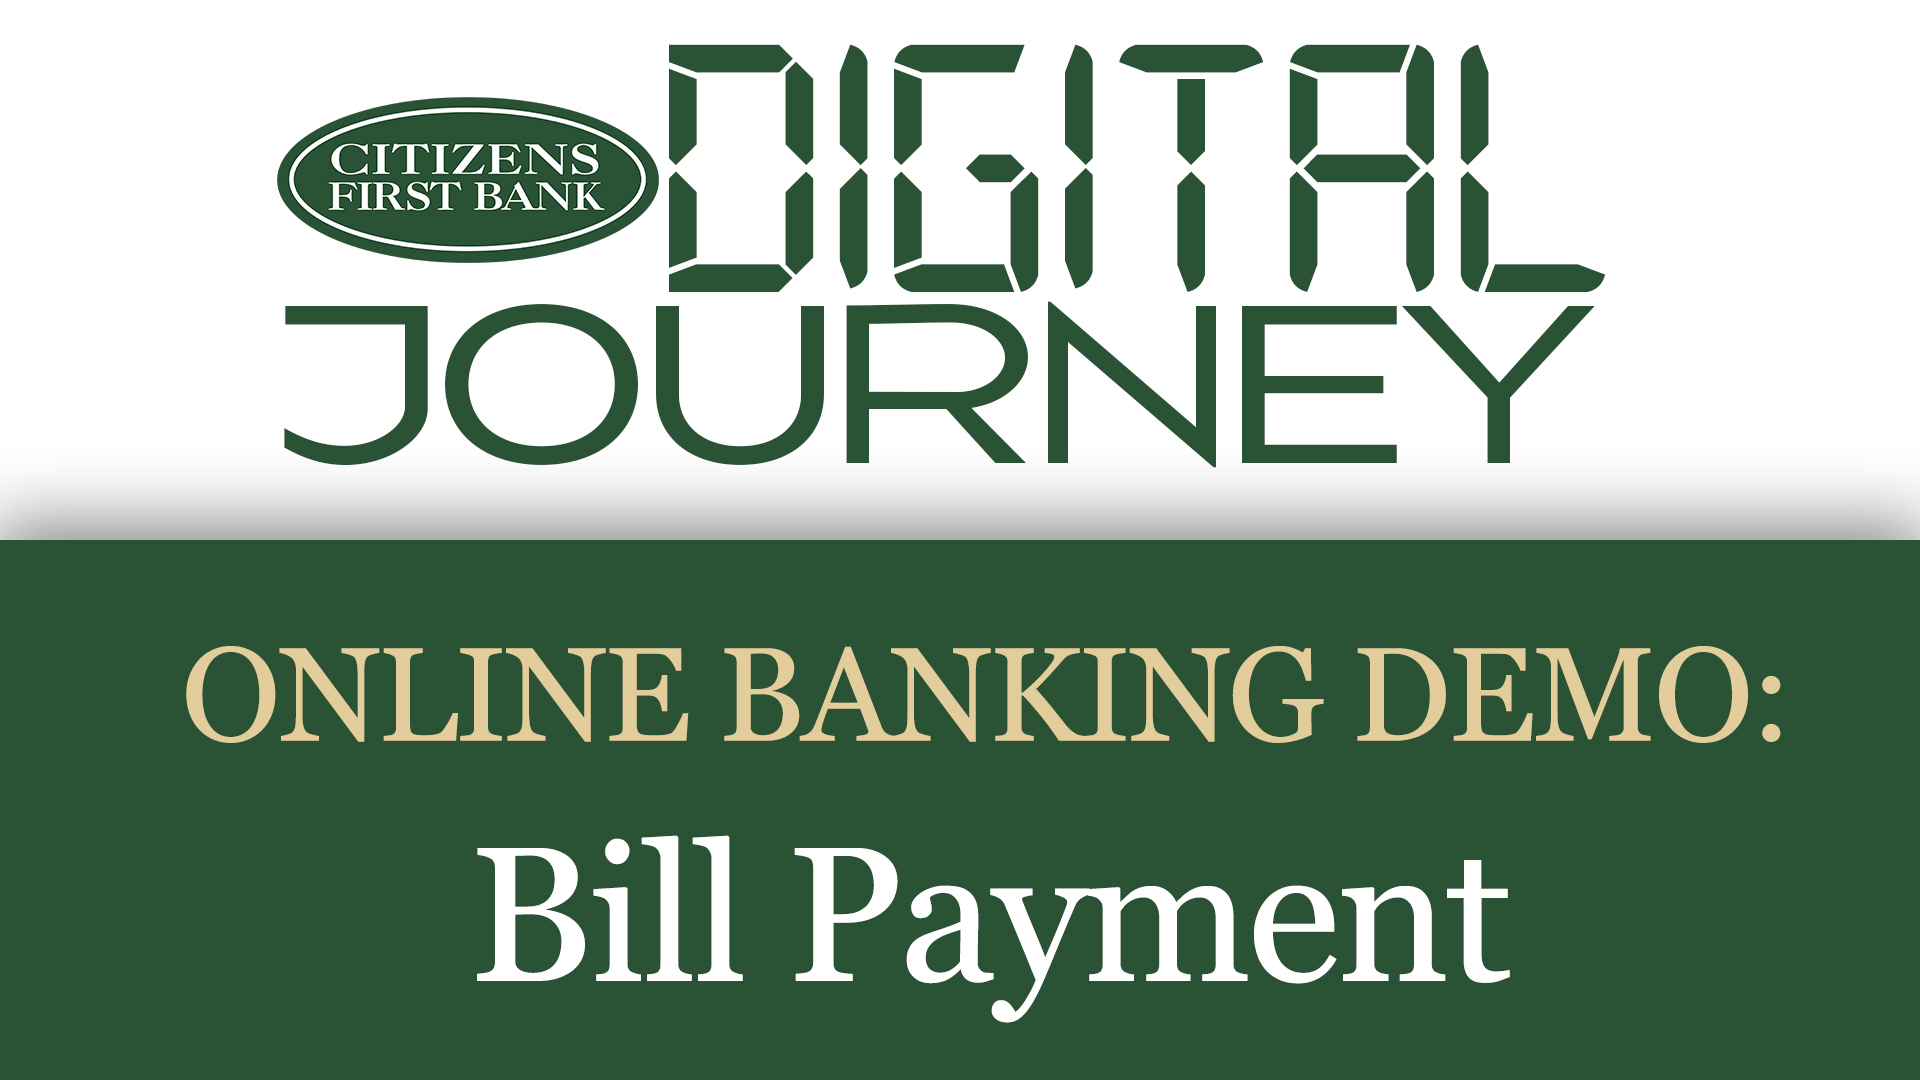 Digital Journey logo with our online banking demo: Bill Payment